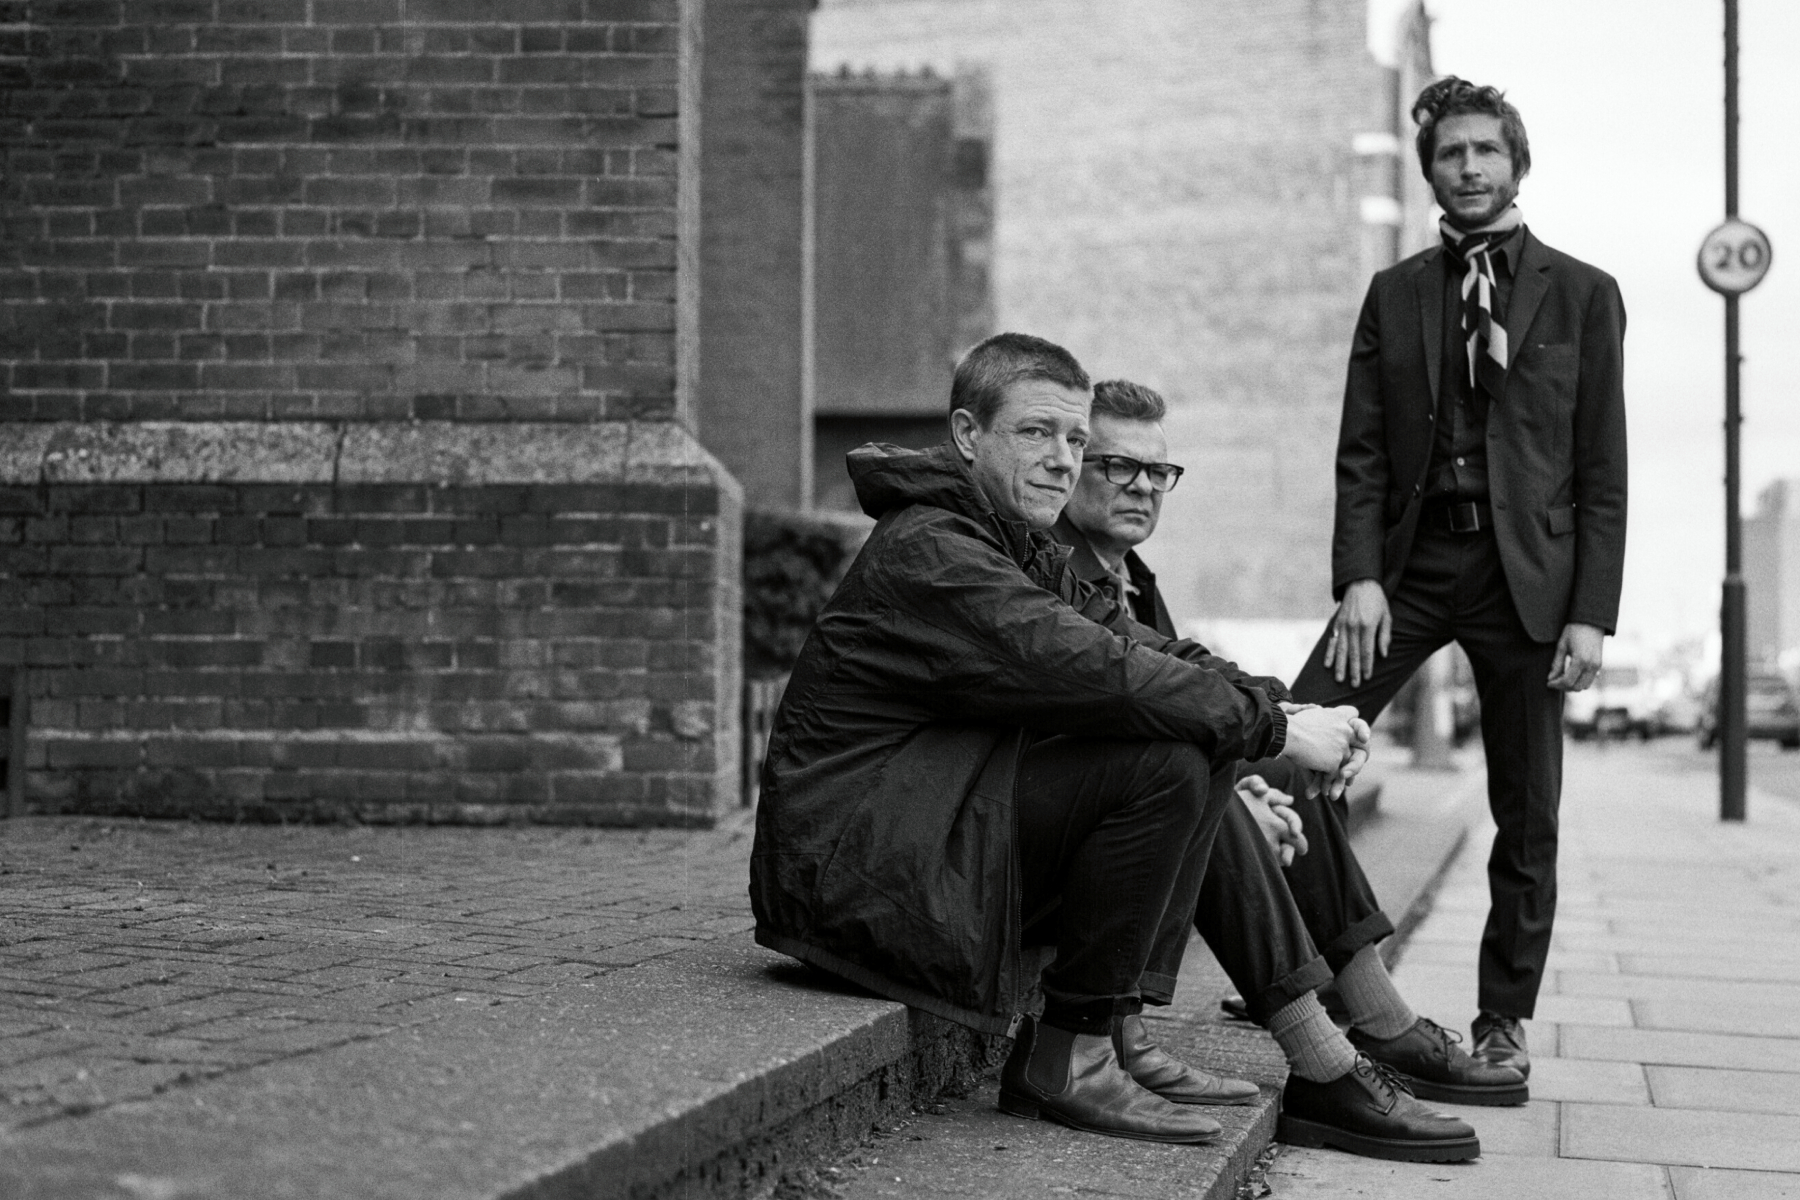 Interpol Preview ‘The Other Side of Make-Believe’ LP With ‘Toni’